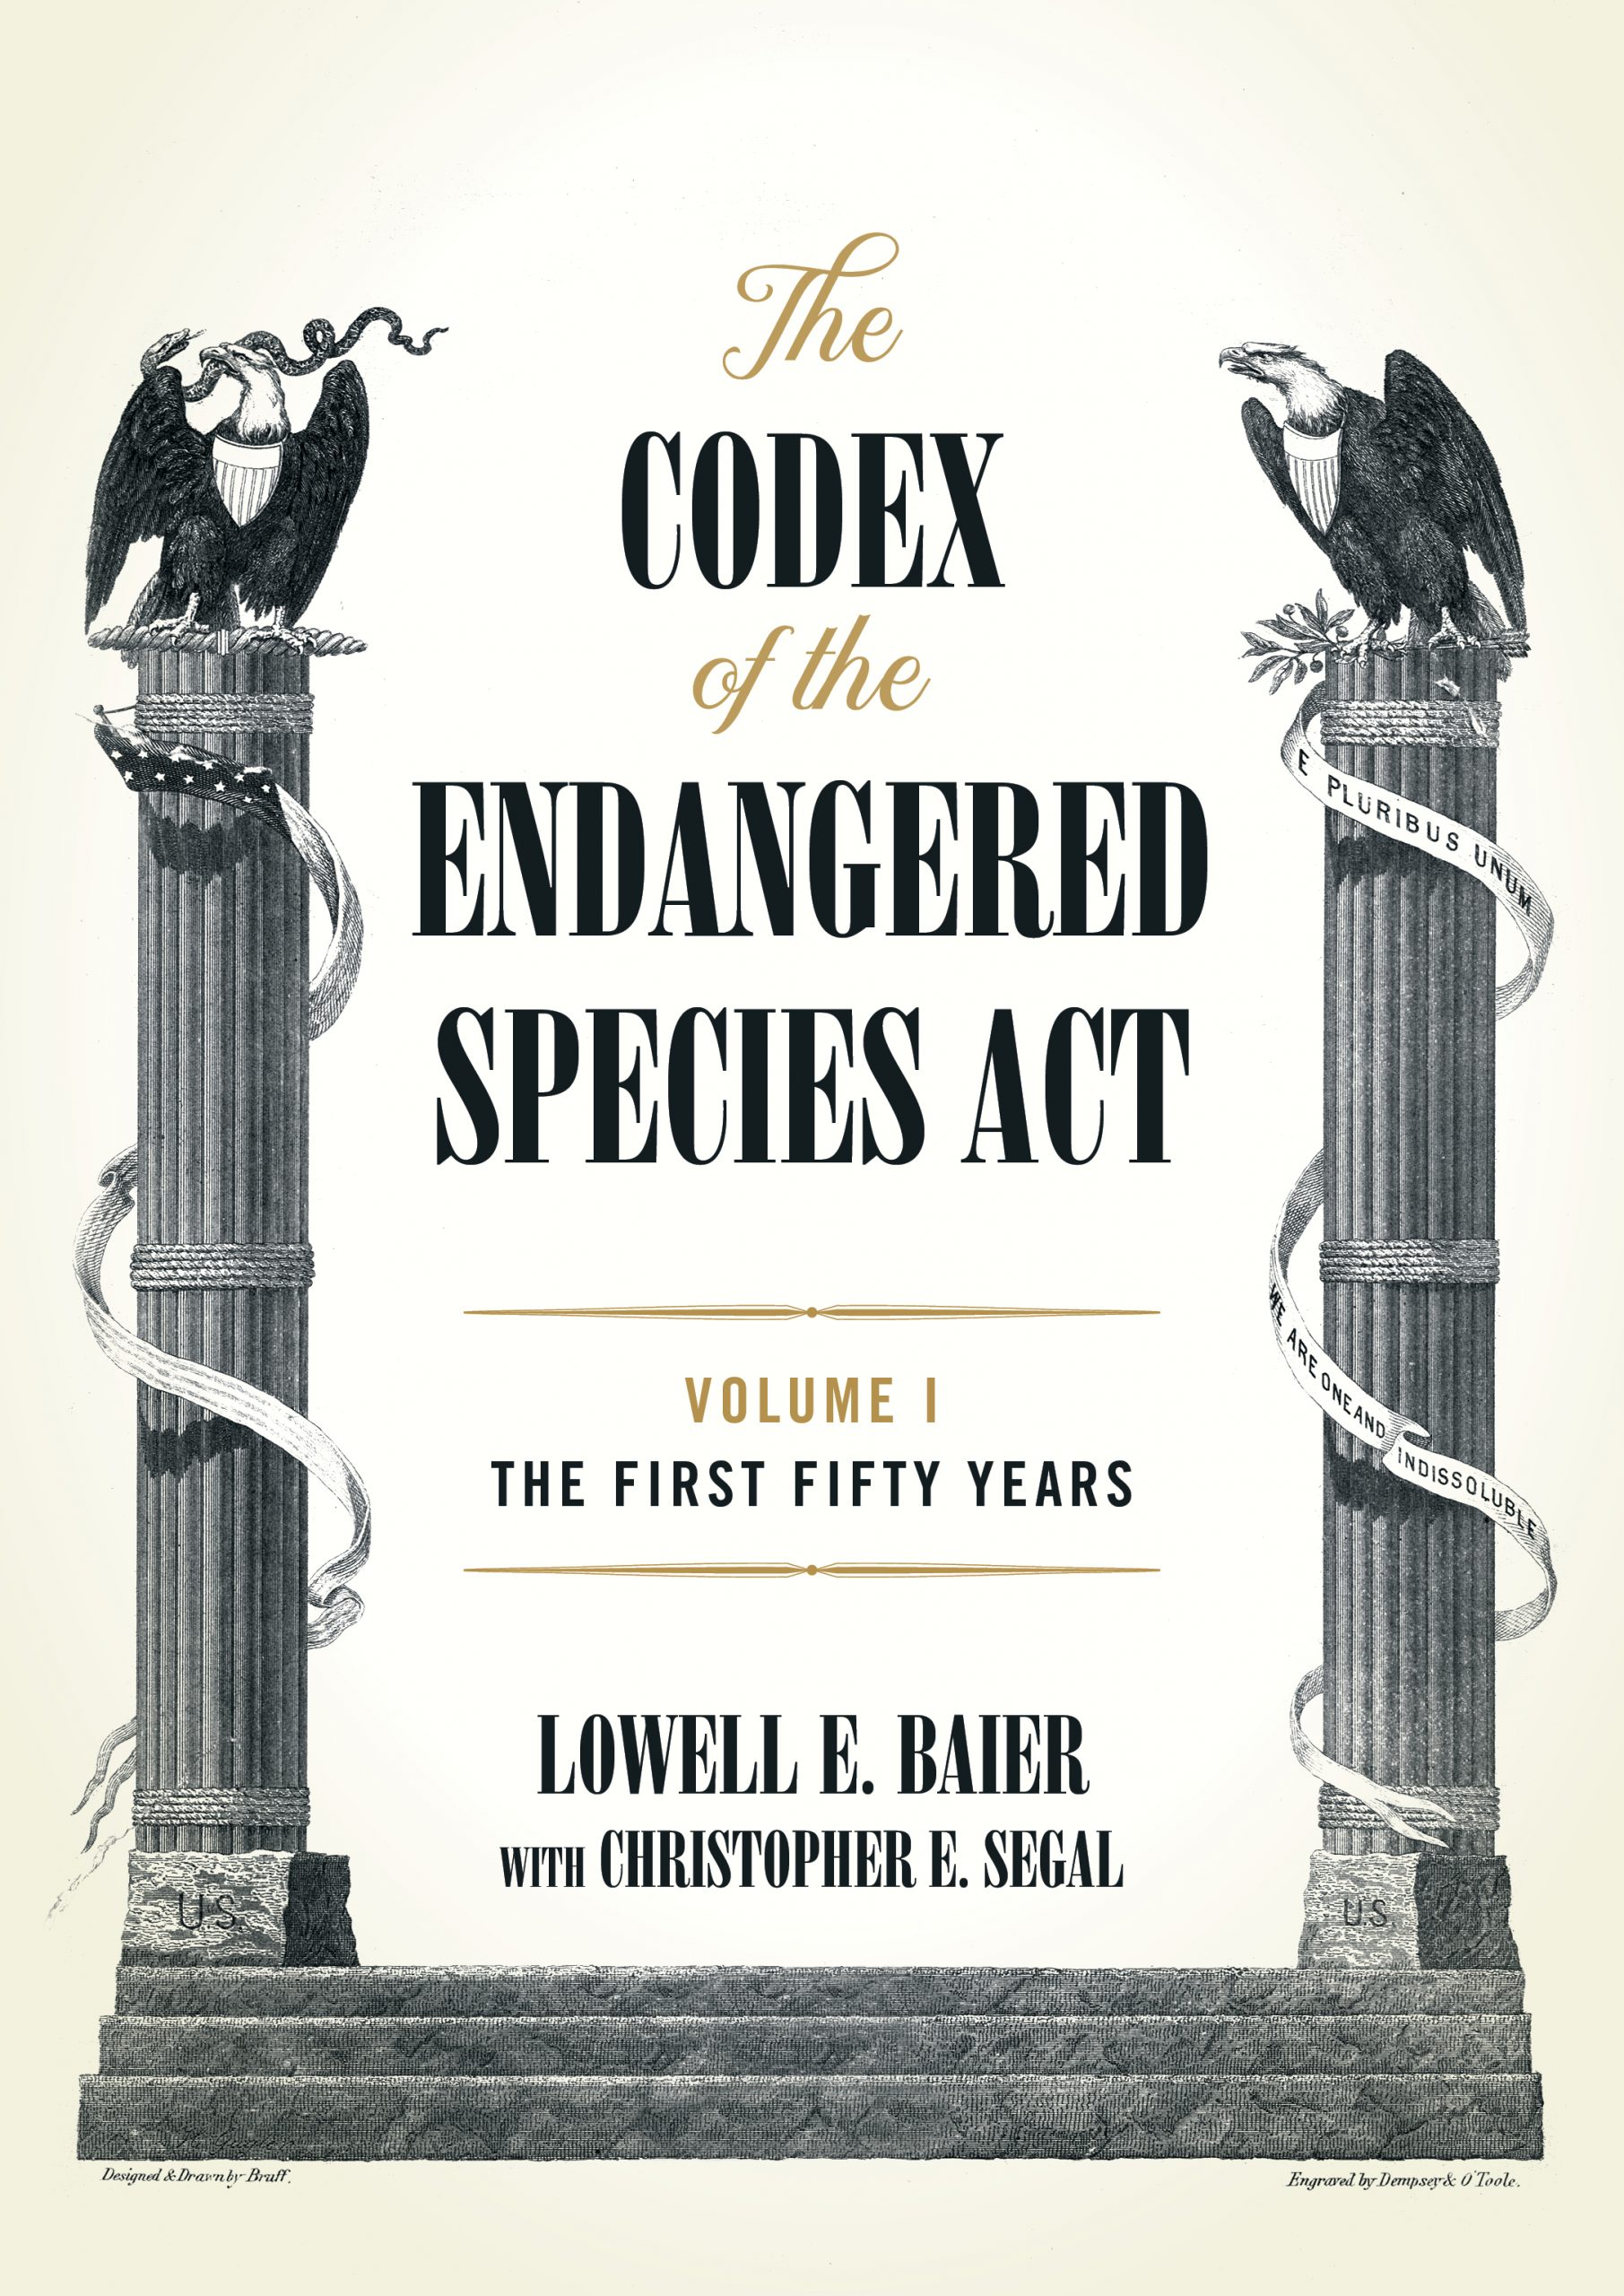 The Codex of the Endangered Species Act